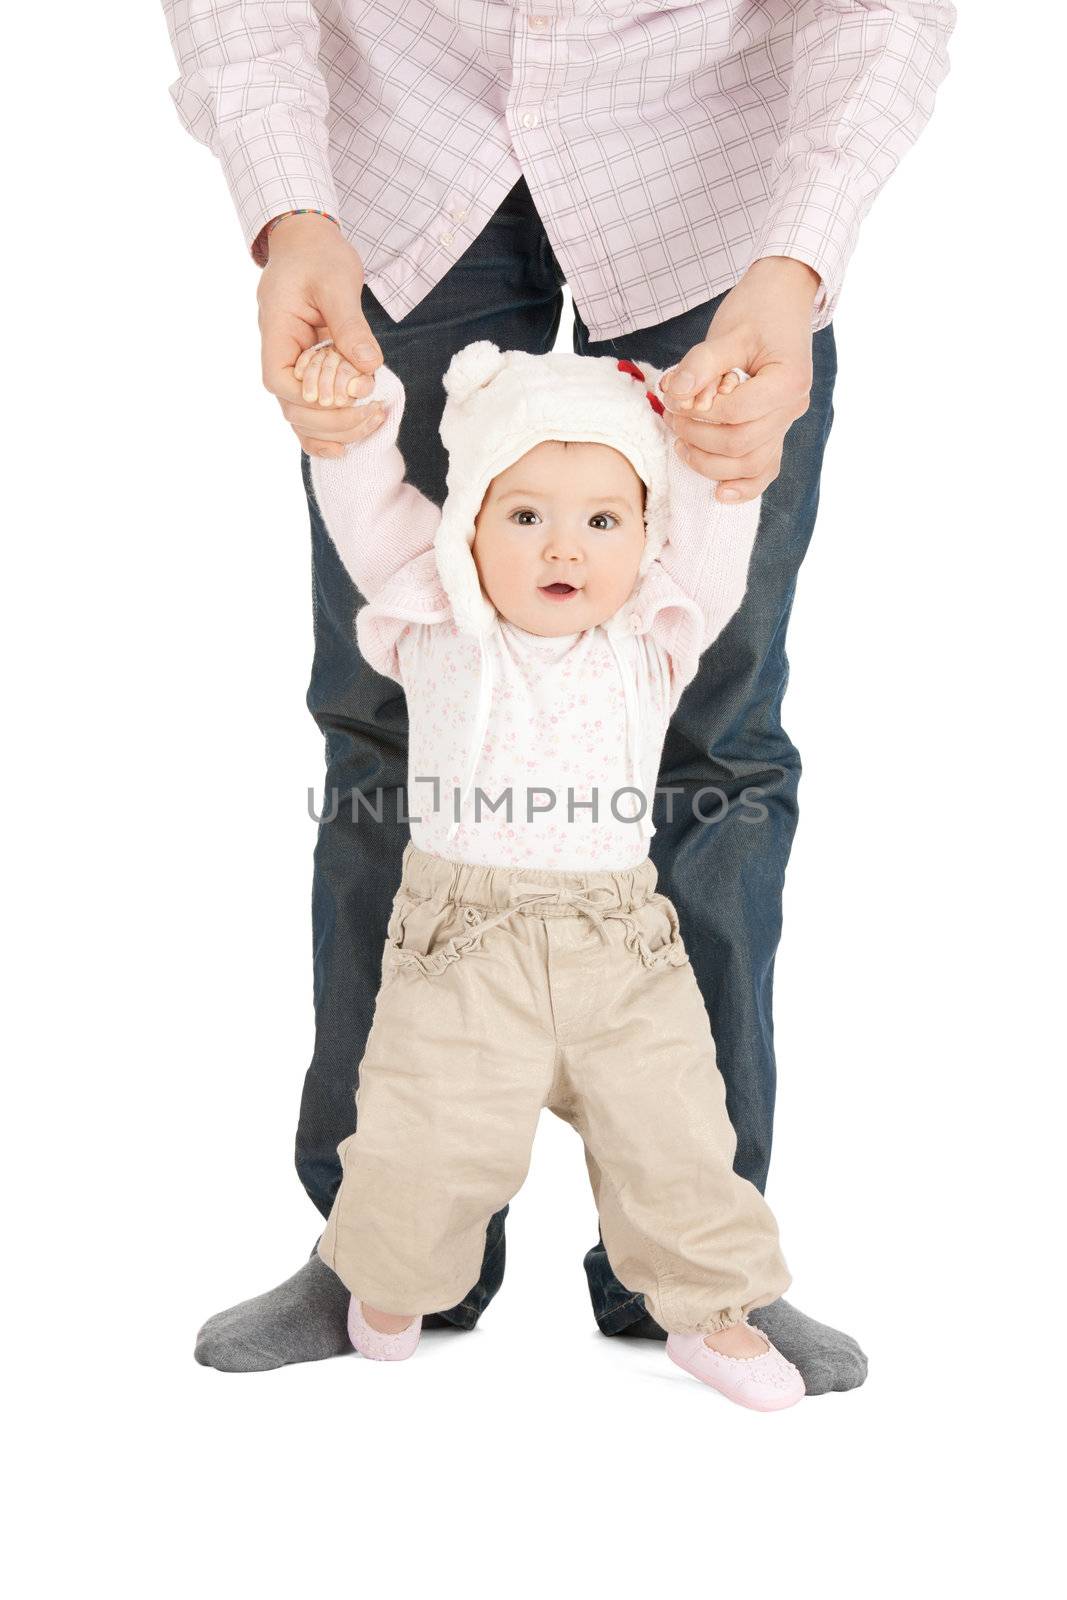 picture of baby making first steps with father help